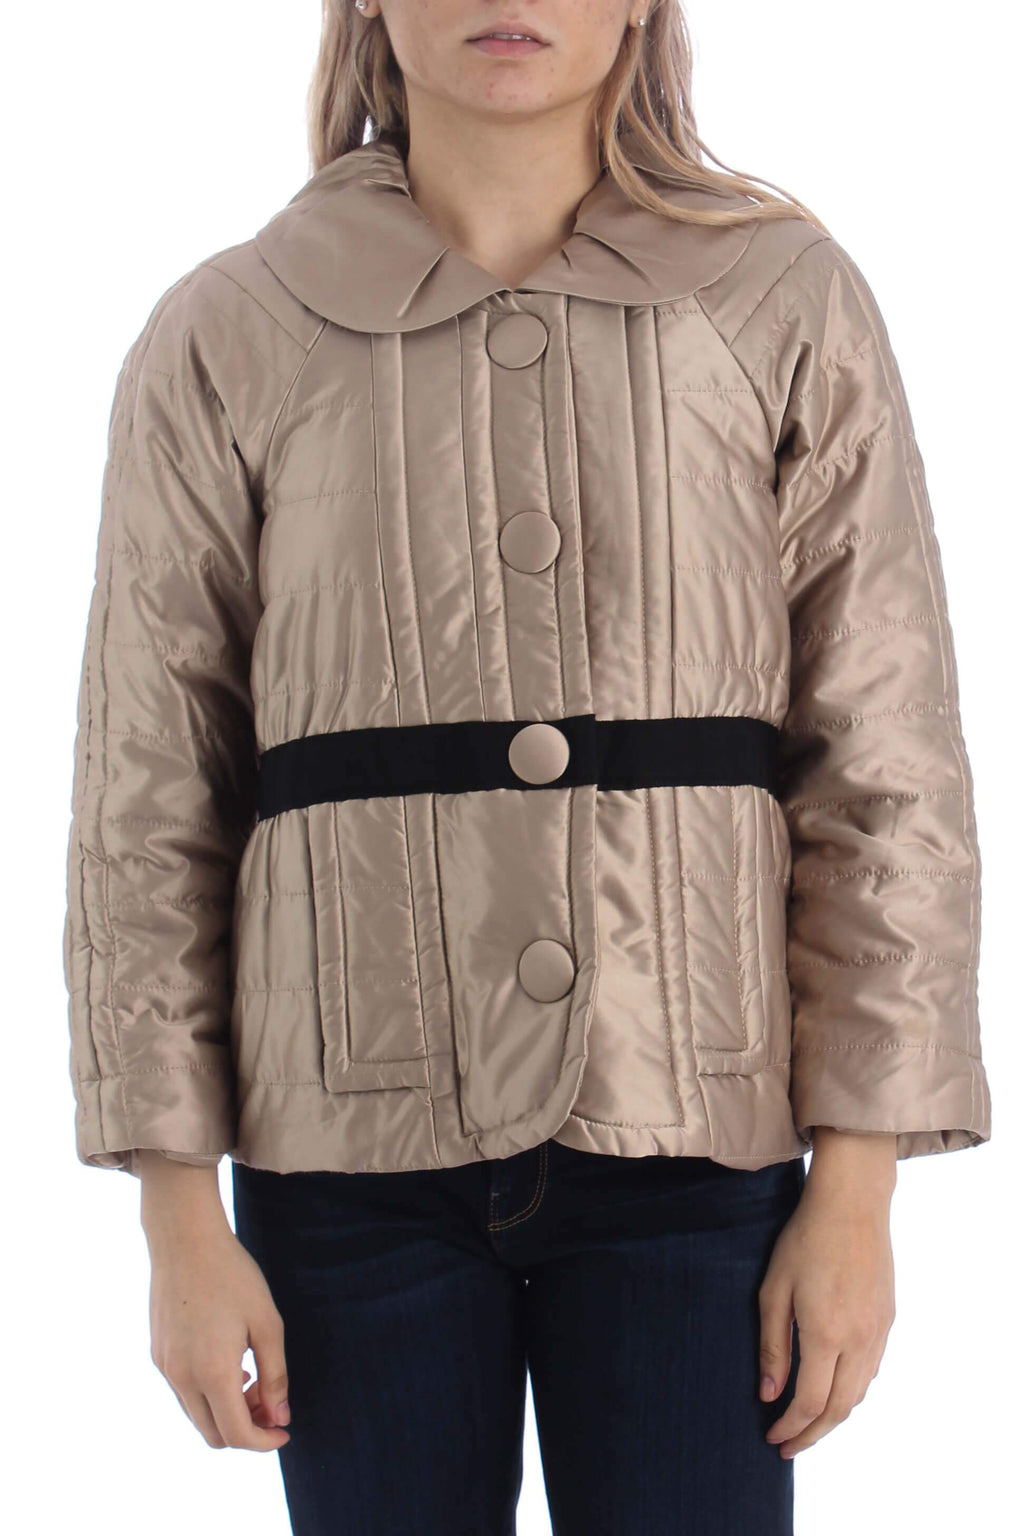 Marc by Marc Jacobs, Talla XS